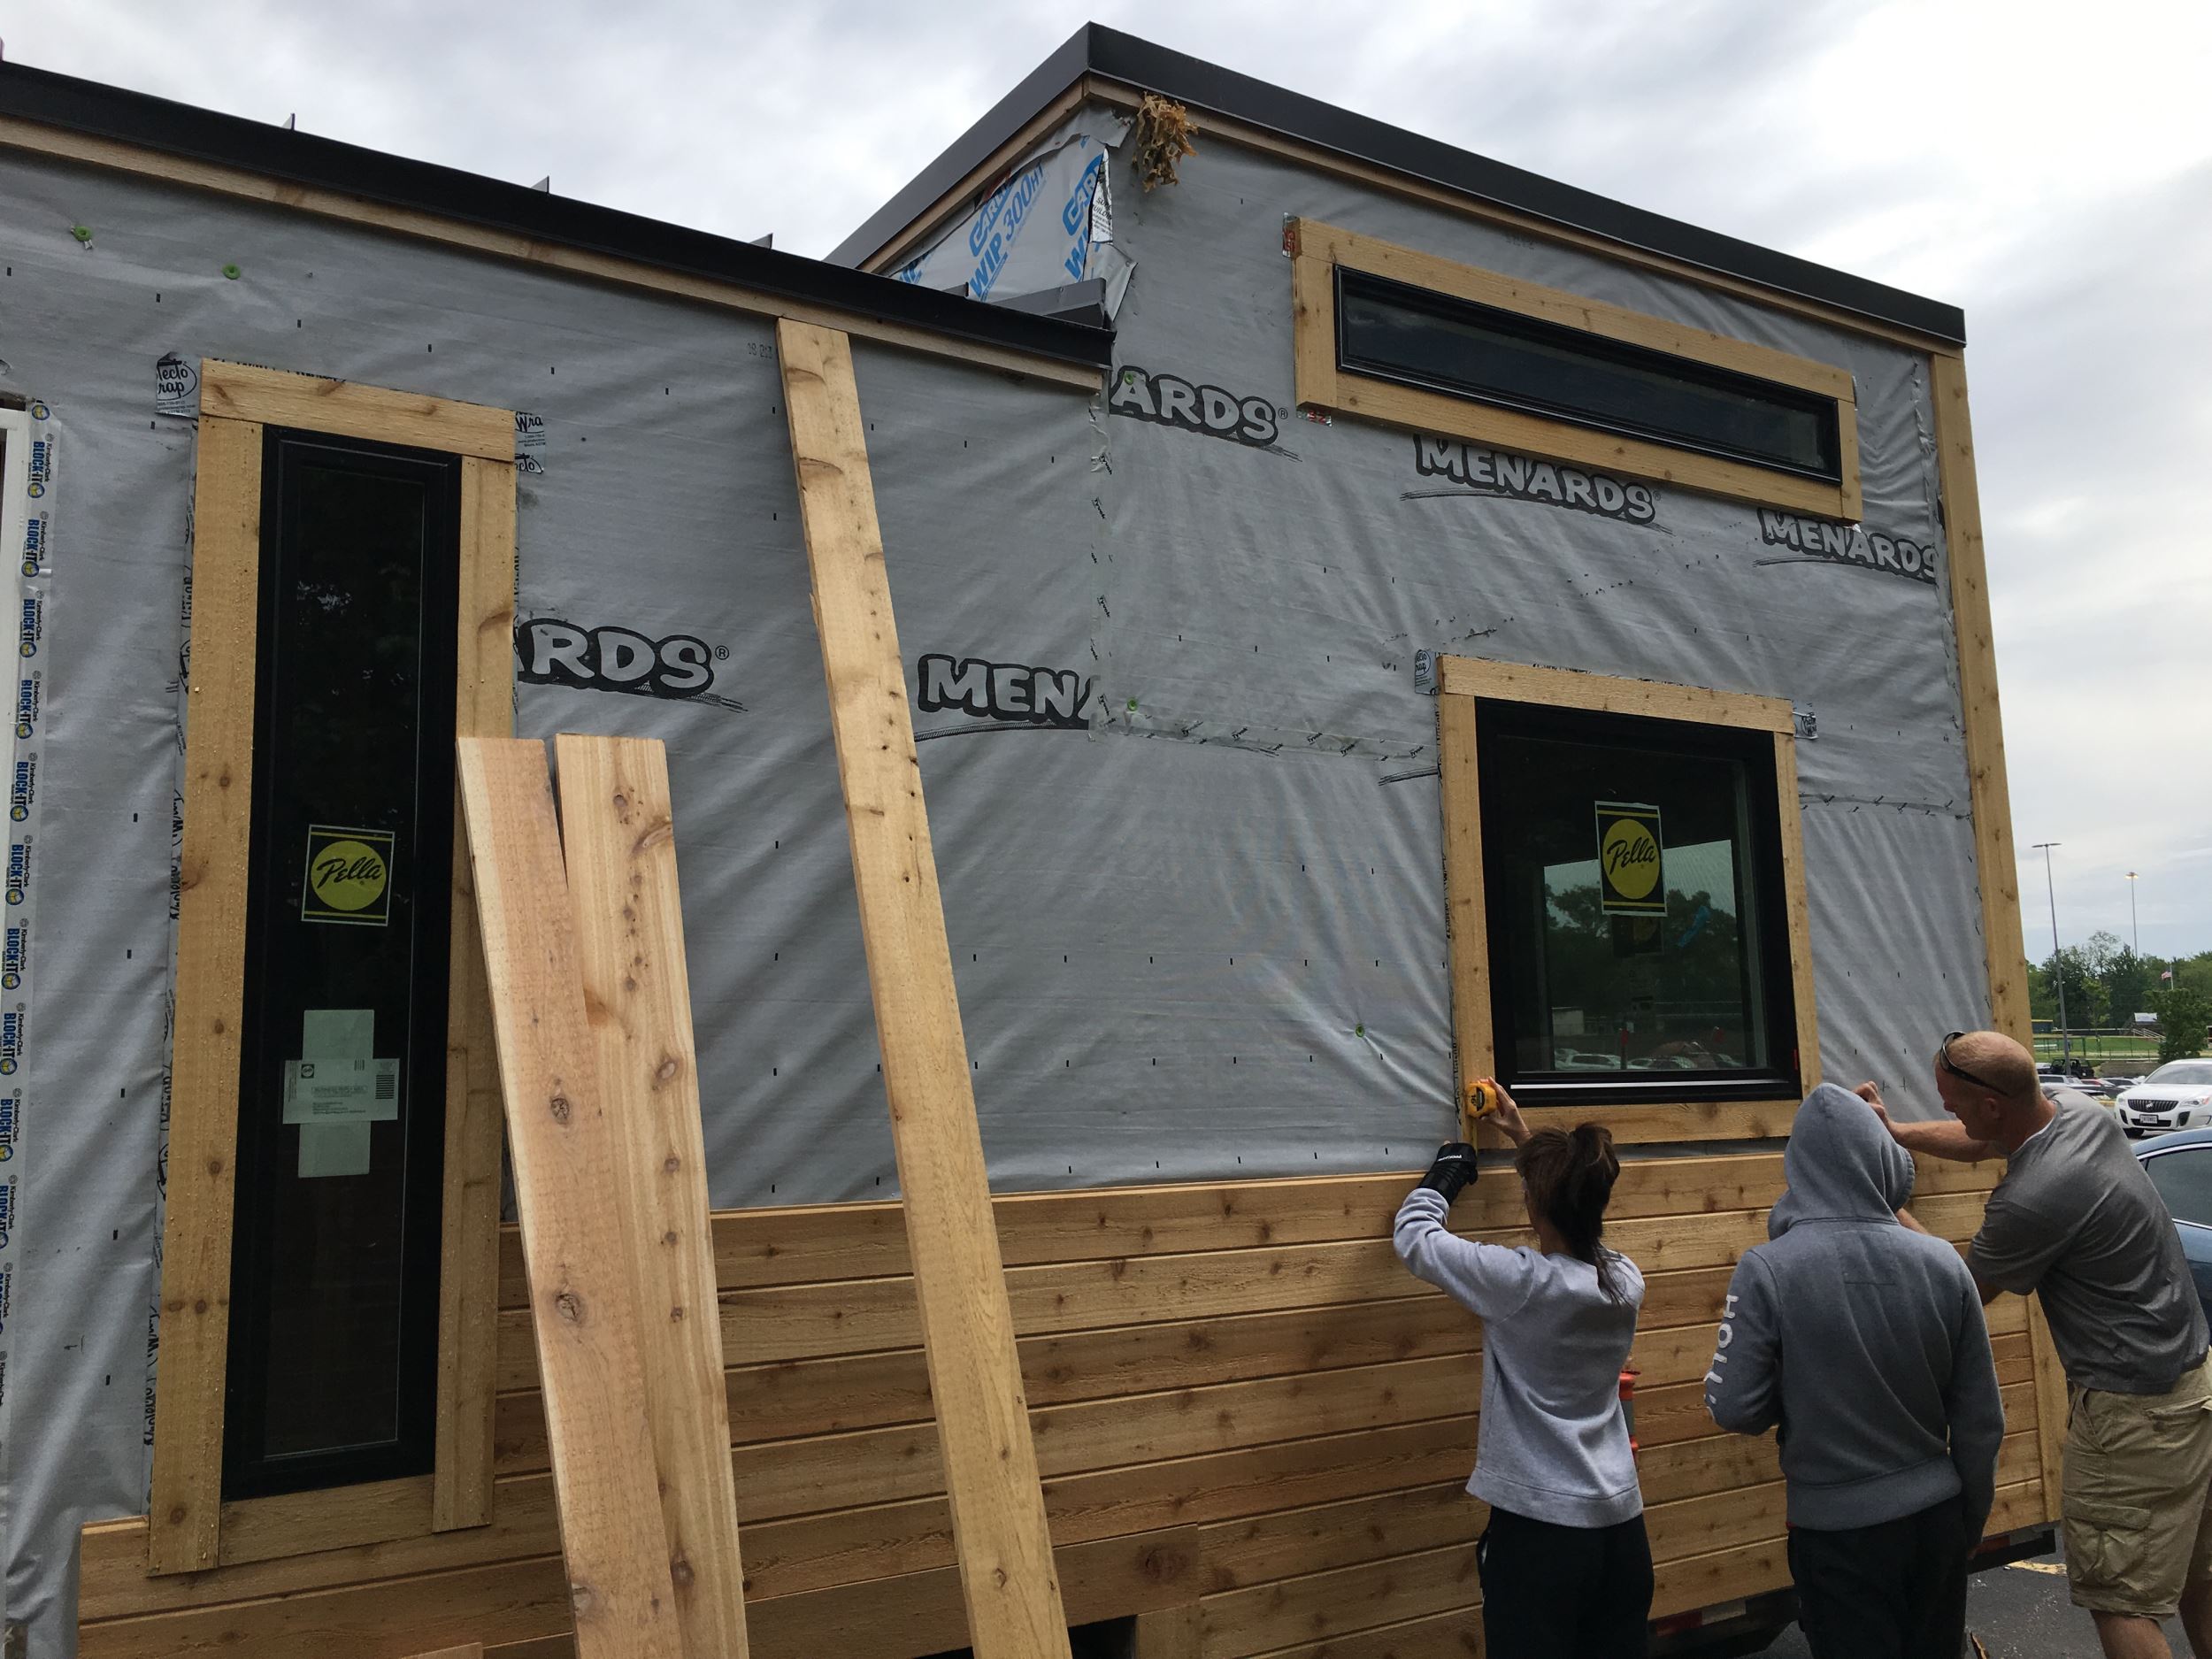 High school students building a tiny house as part of a class project